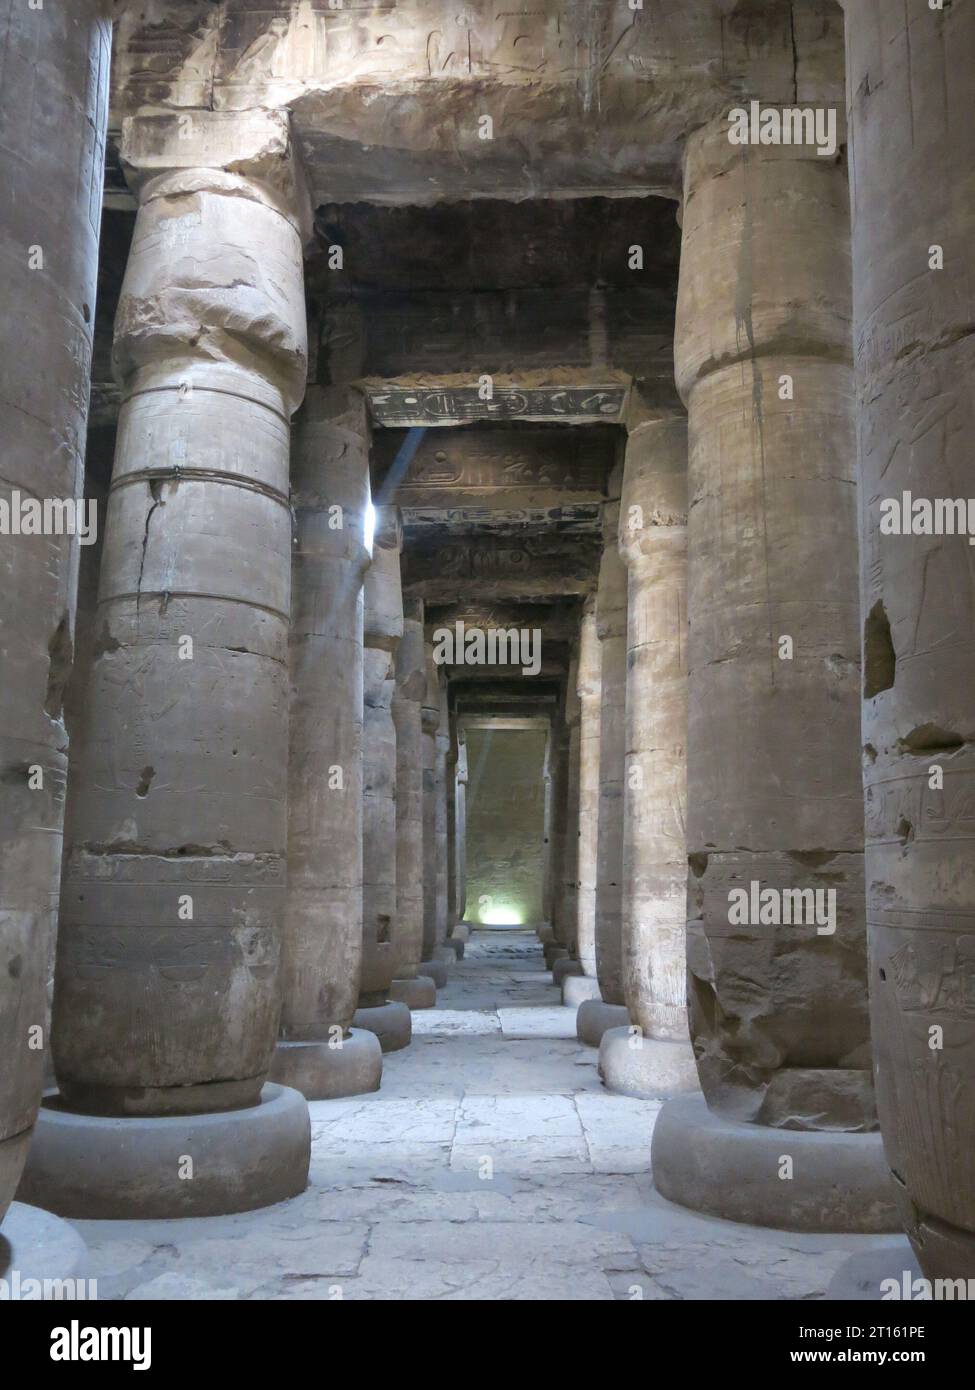 Tall stone pillars in the the hypostyle hall at the Great Temple of Seti I at the sacred city of Abydos, from the times of Ancient Egypt. Stock Photo